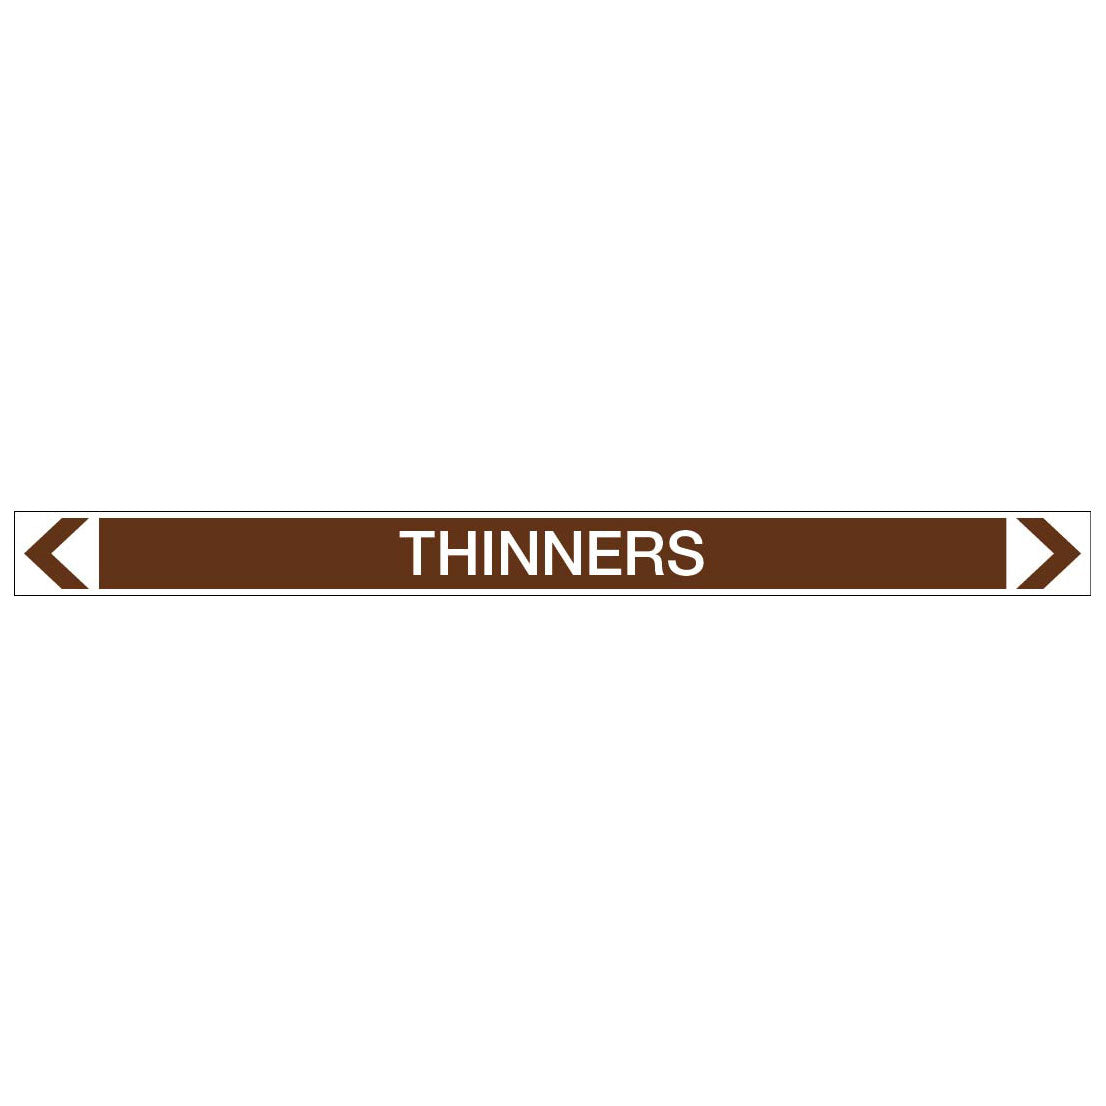 Oils - Thinners - Pipe Marker Sticker